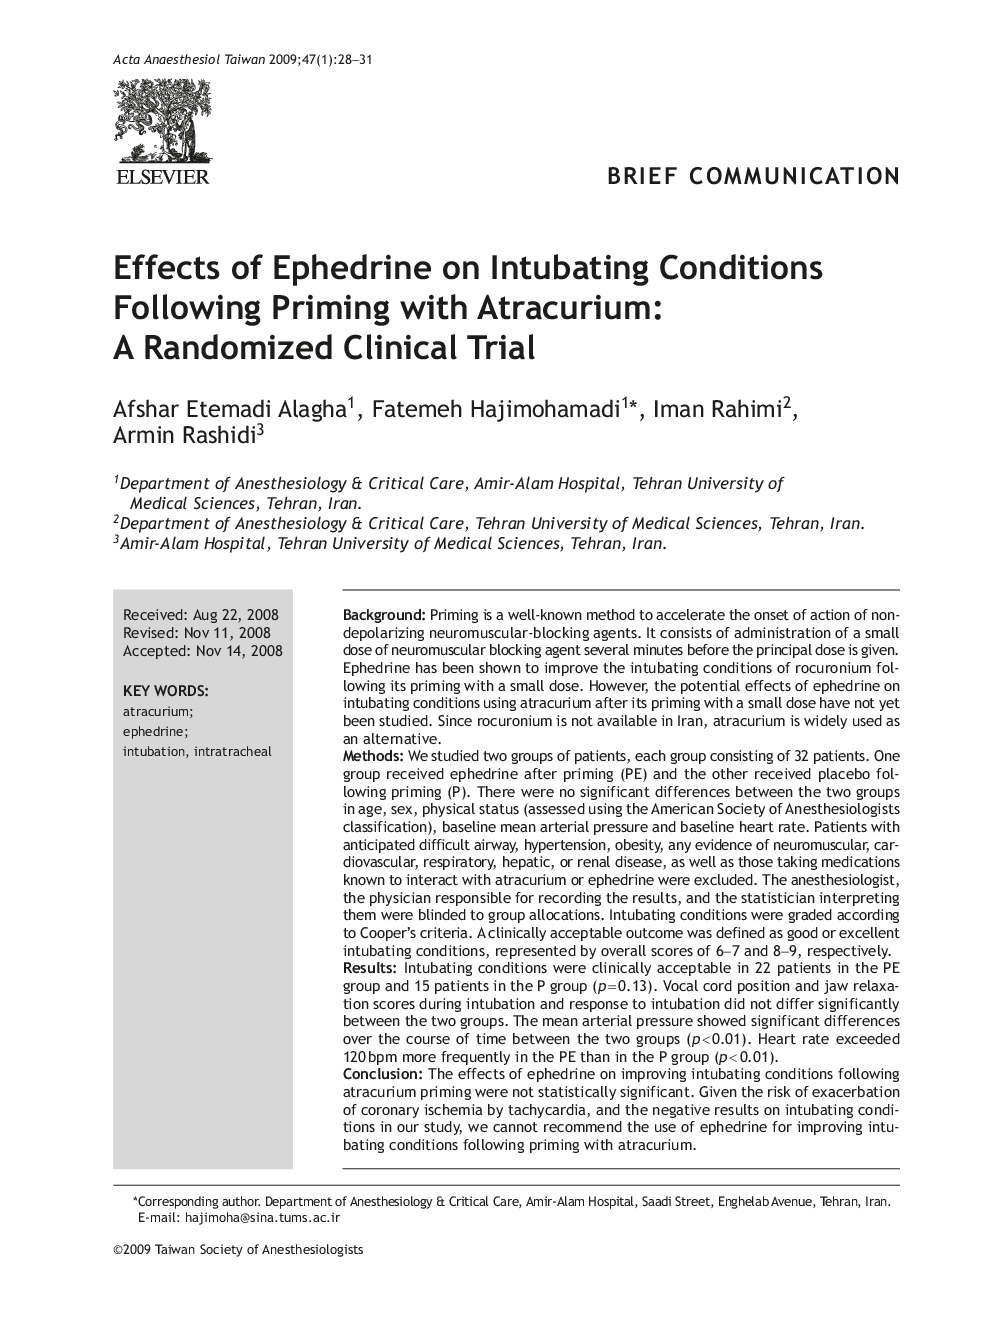 Effects of Ephedrine on Intubating Conditions Following Priming with Atracurium: A Randomized Clinical Trial